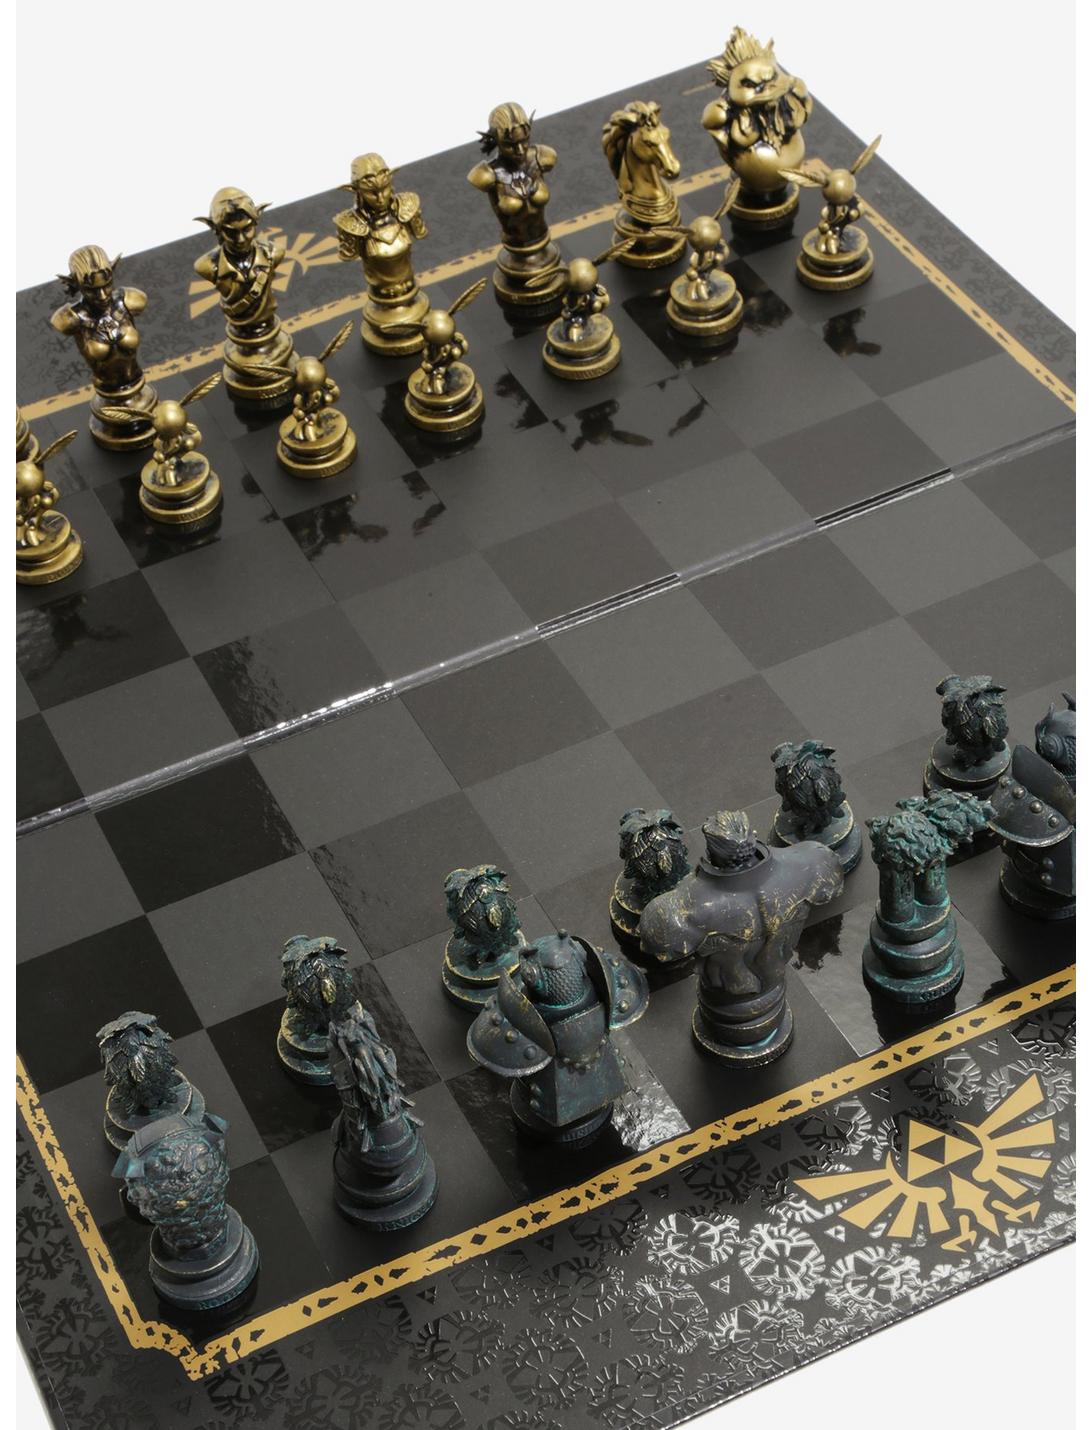 Chess The Legend Of Zelda Collector's Edition Board Game 